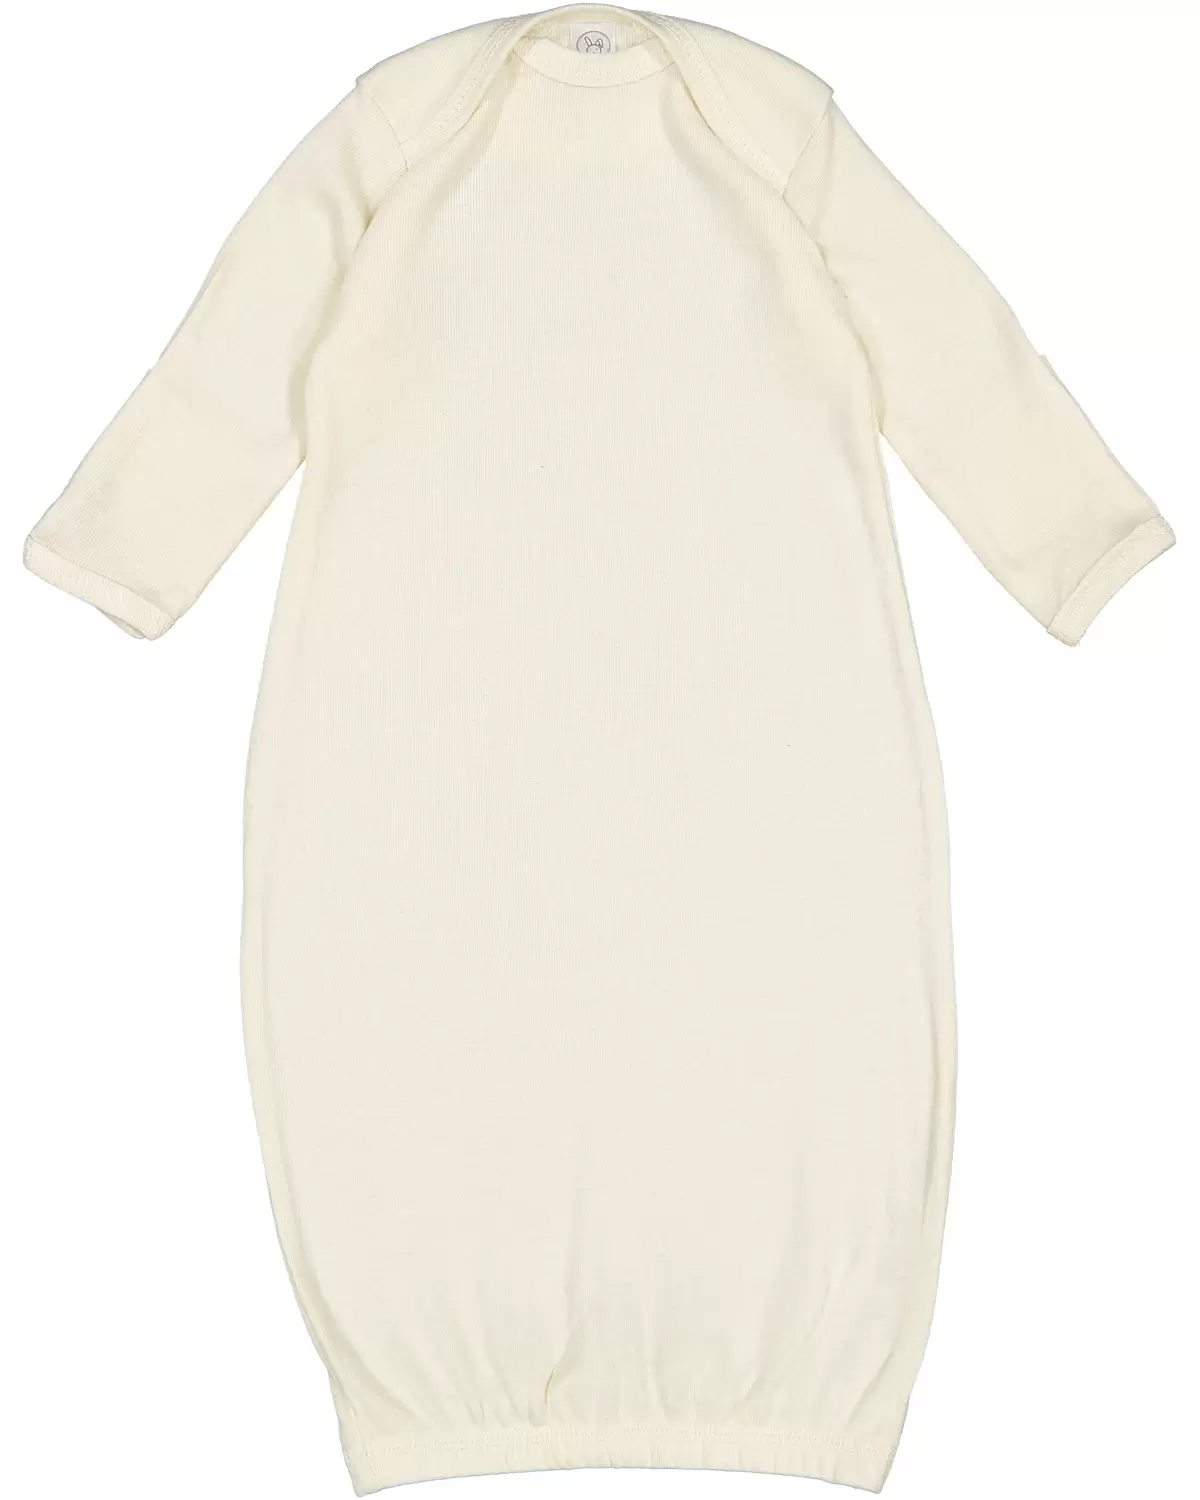 Rabbit Skins 4406 Infant Baby Rib Lap Shoulder Layette - From $7.36